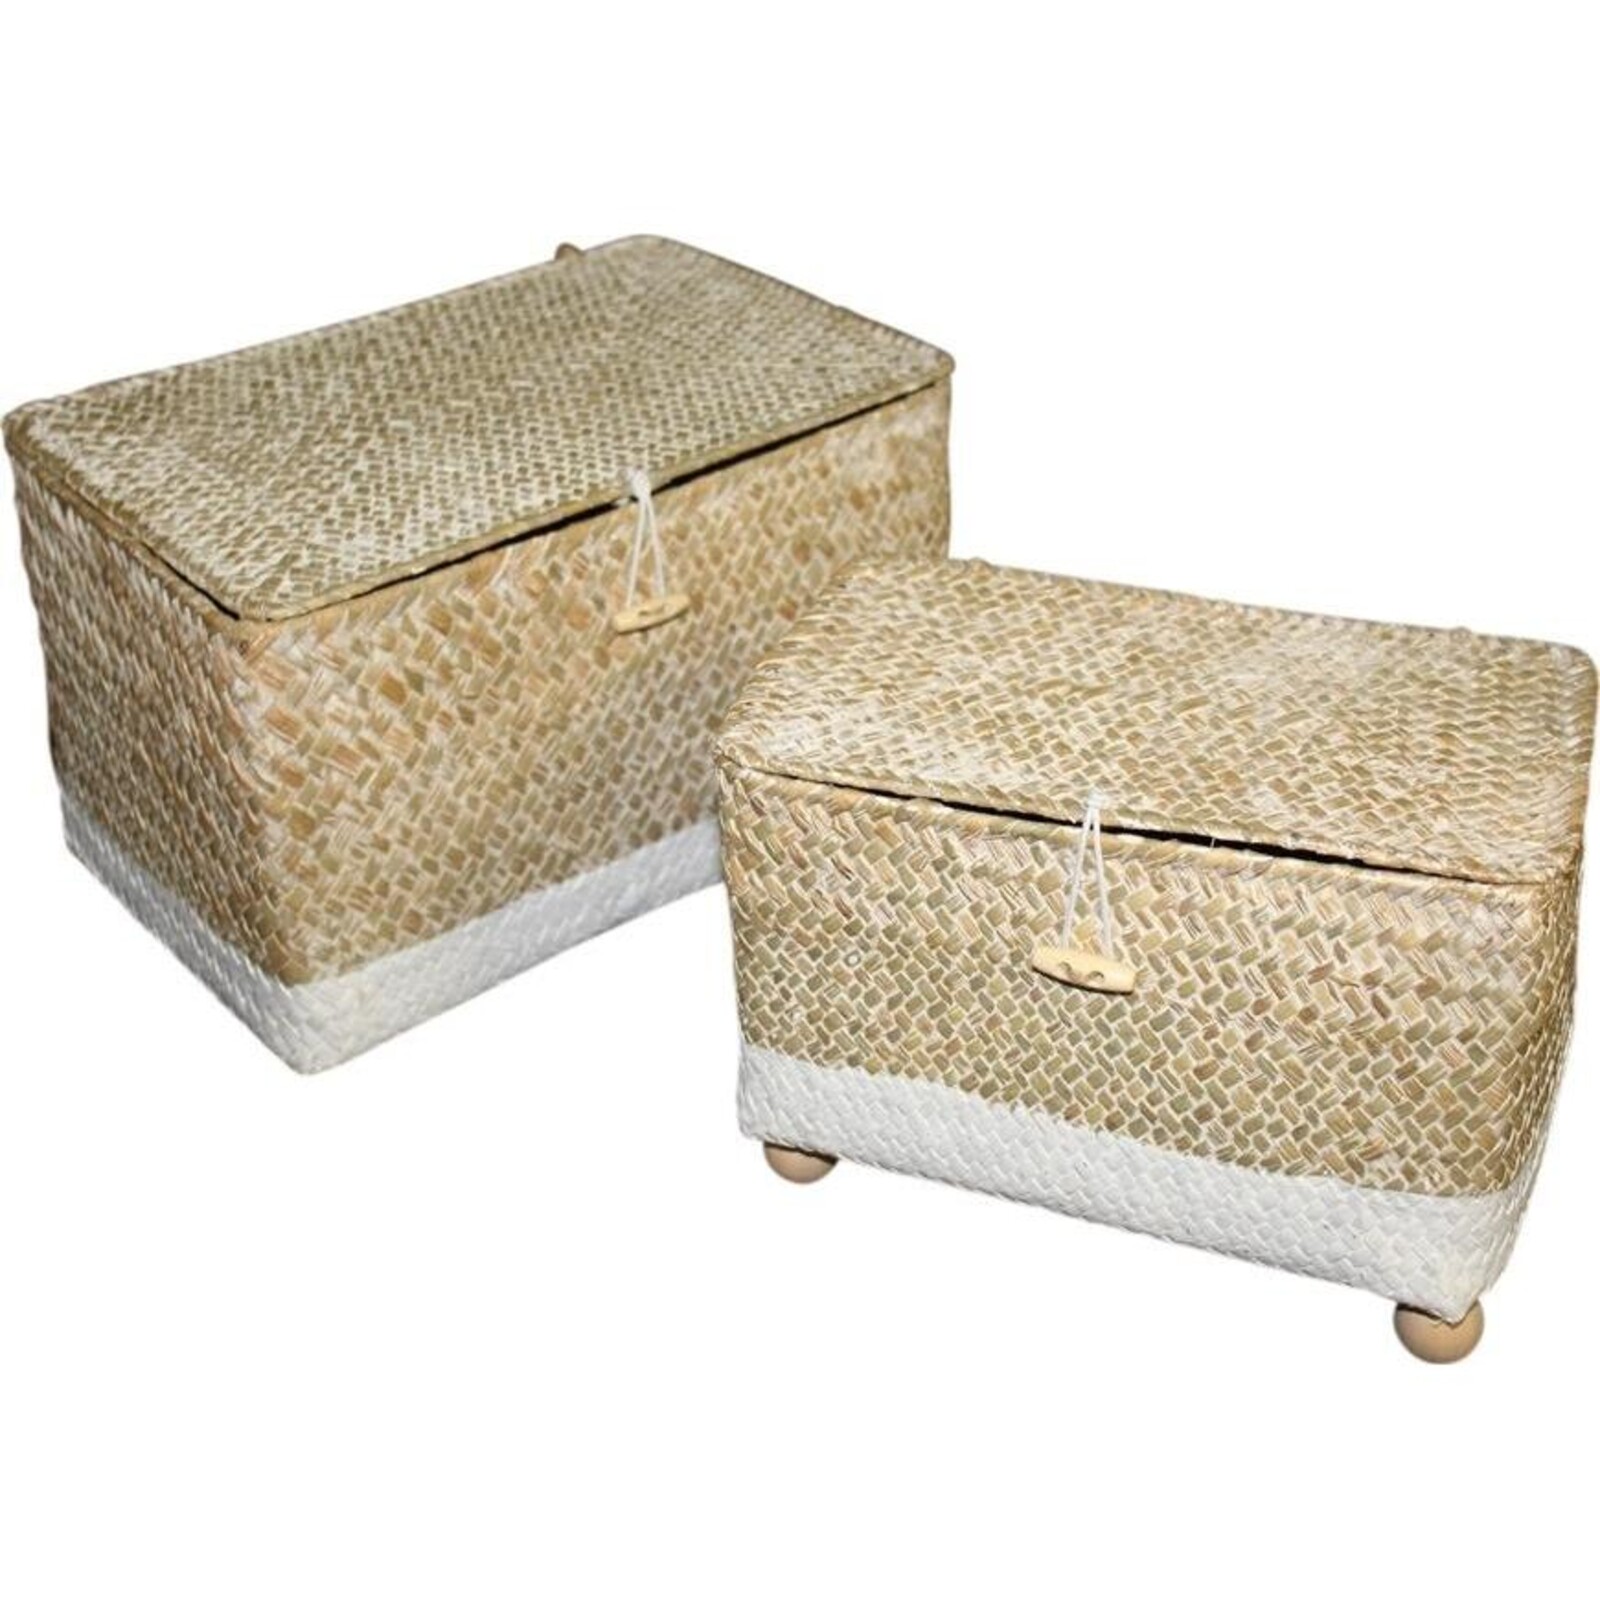 Woven Footed Dipped Box S/2